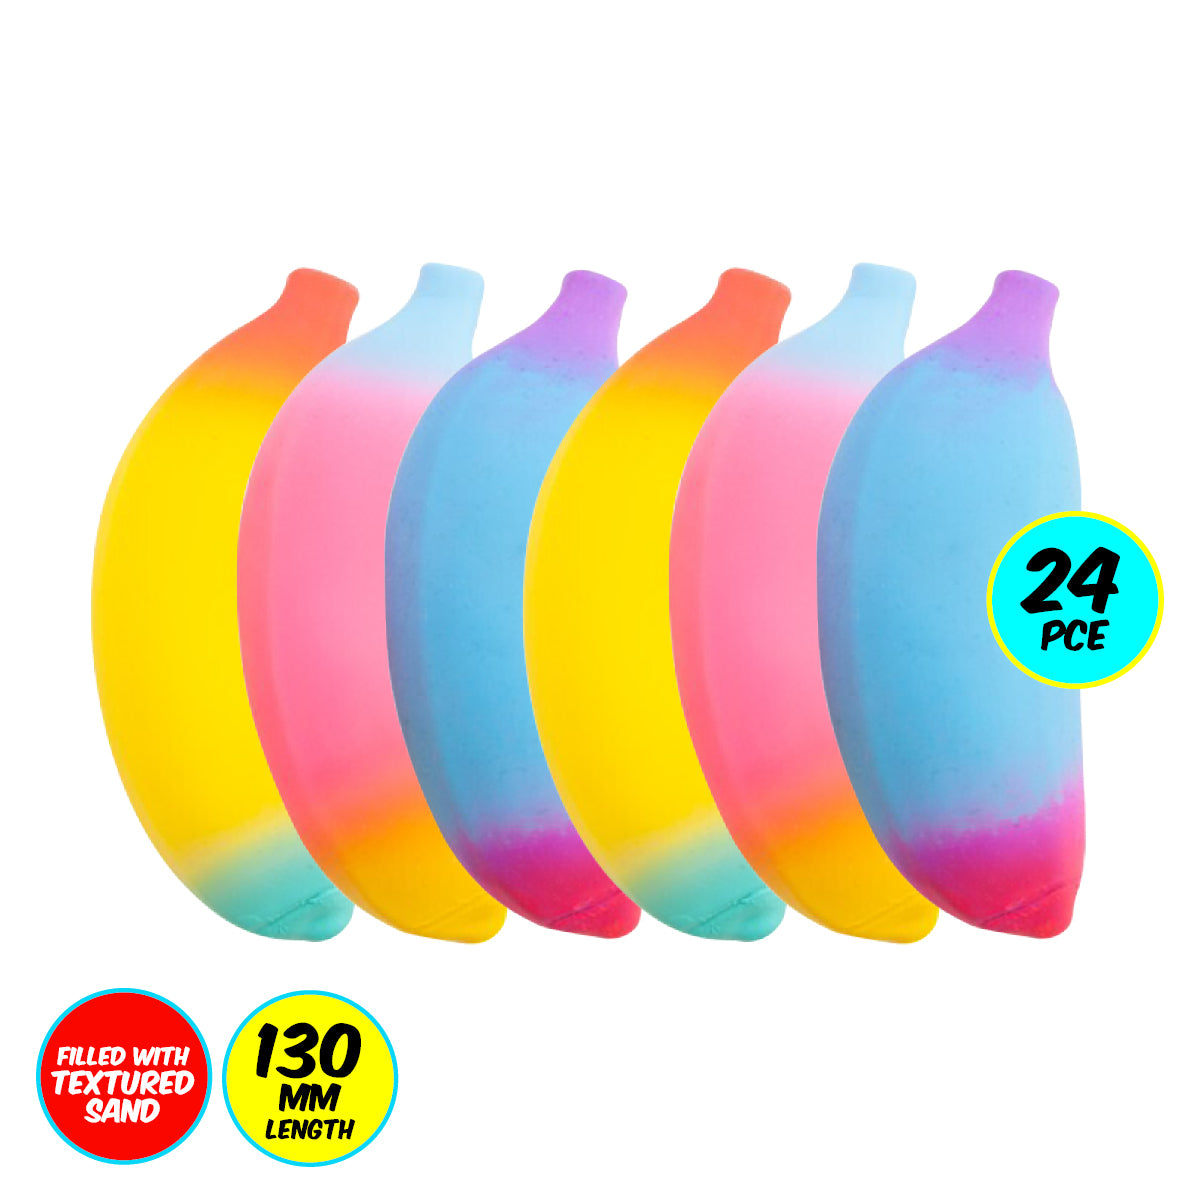 Party Central 24PCE Squeezy Bananas Bright Stretchy Squishy Sensory Play 13cm